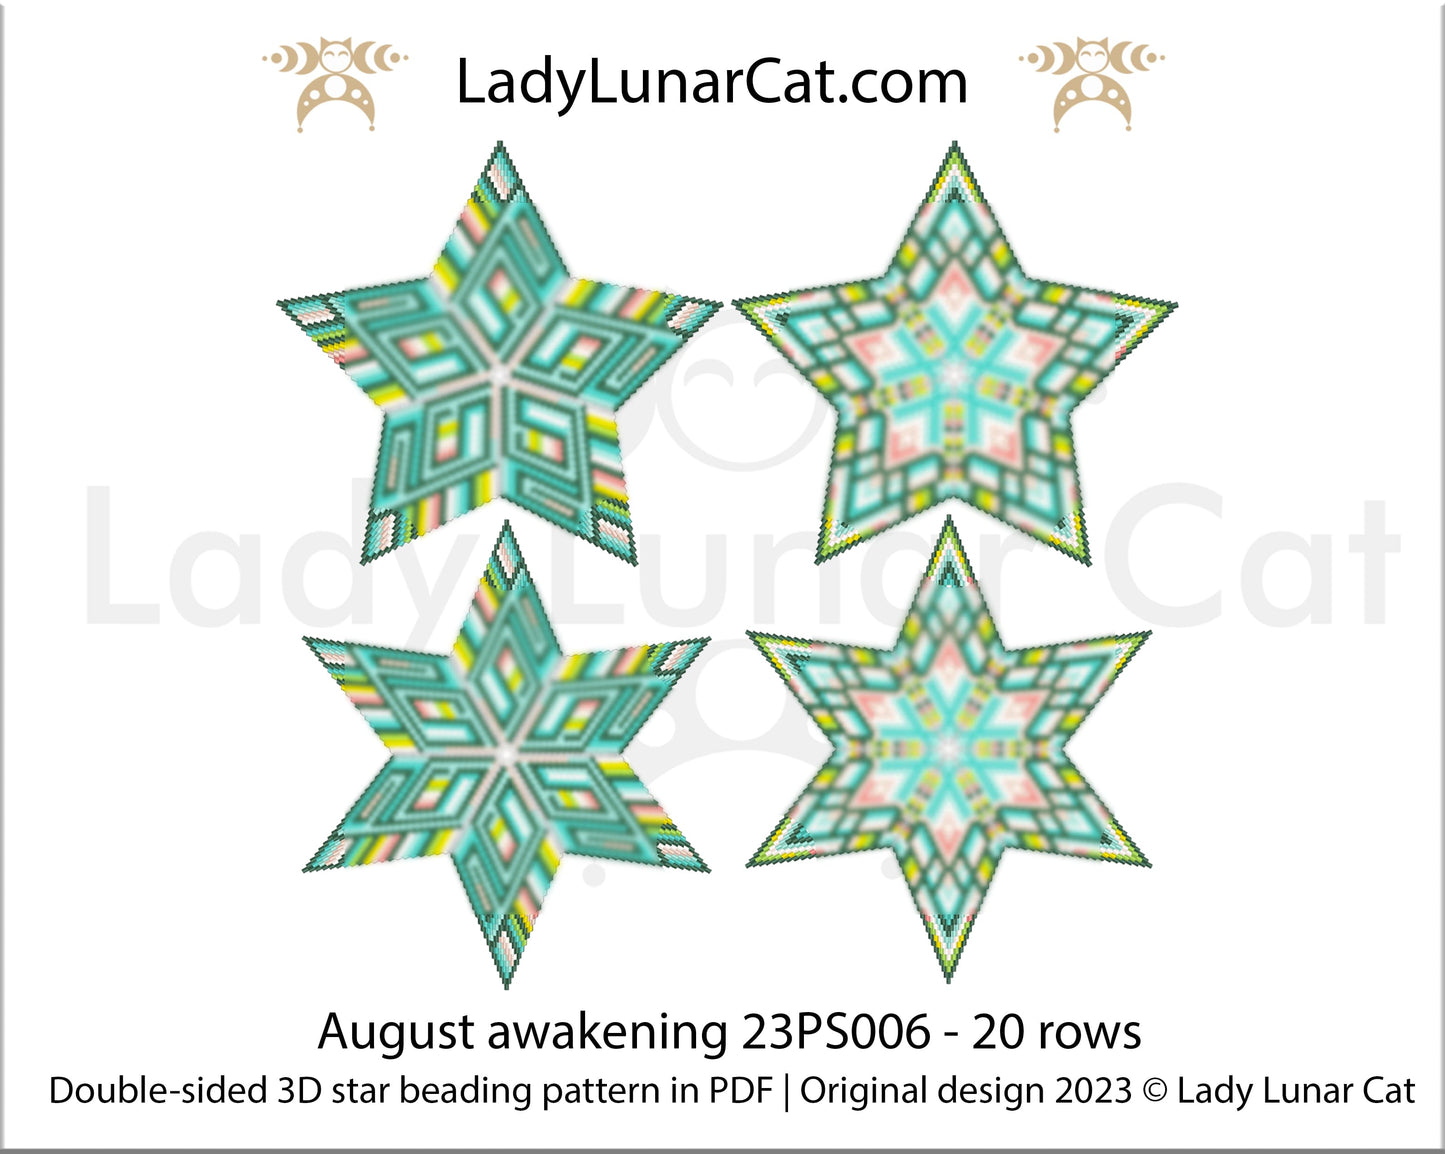 Copy of Peyote star pattern for beading - Summer 23PS00314 rows LadyLunarCat